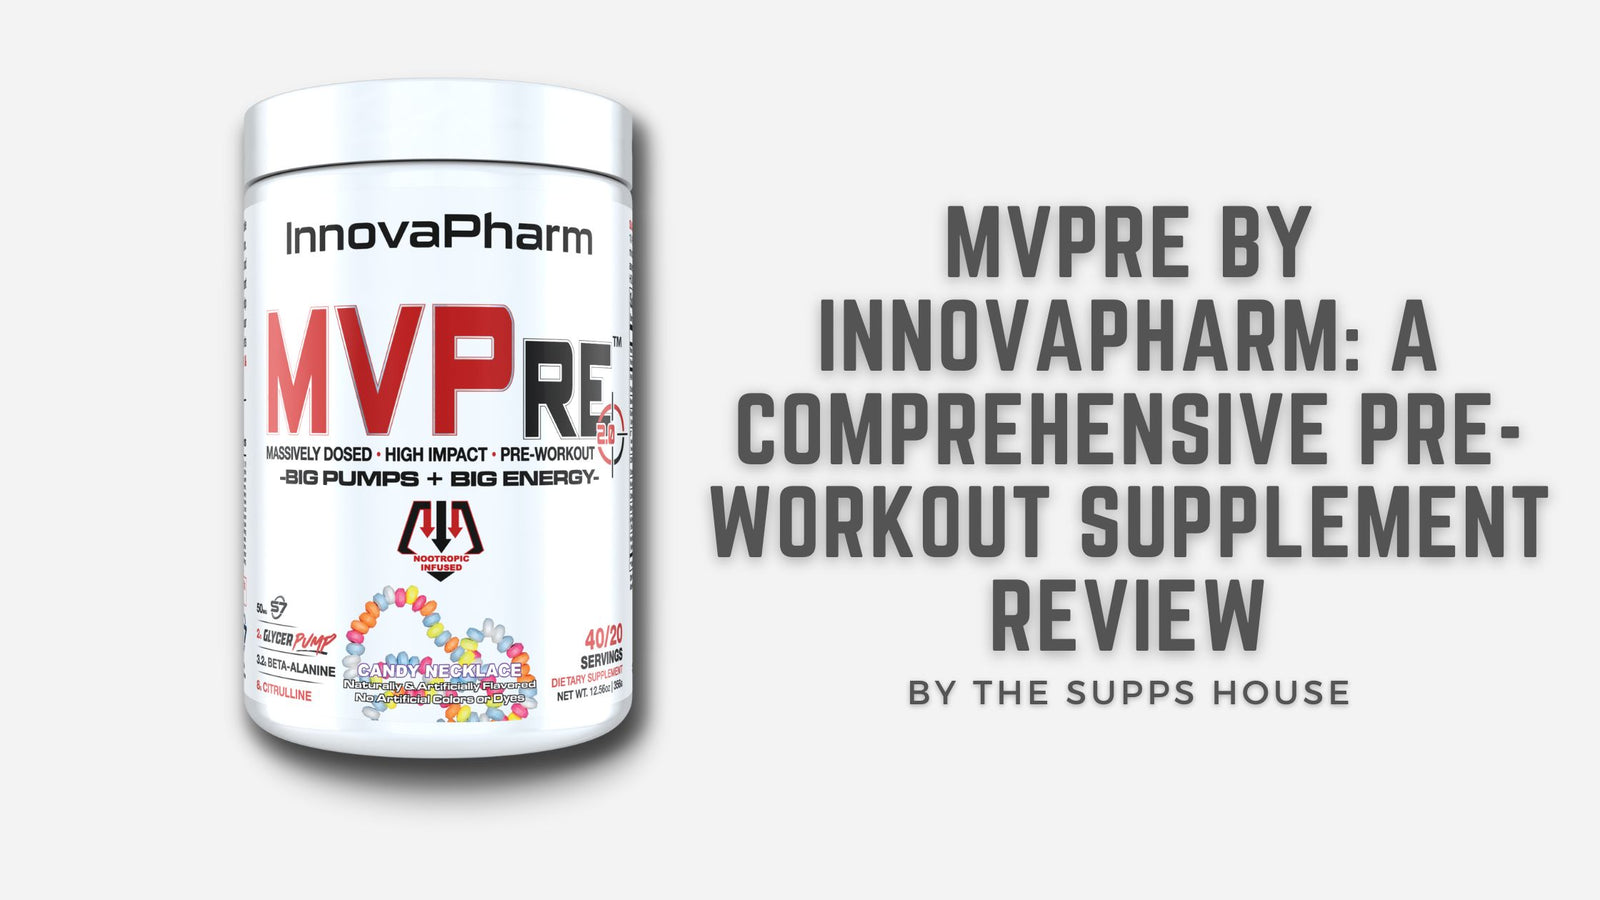 MVPre by InnovaPharm: A Comprehensive Pre-Workout Supplement Review